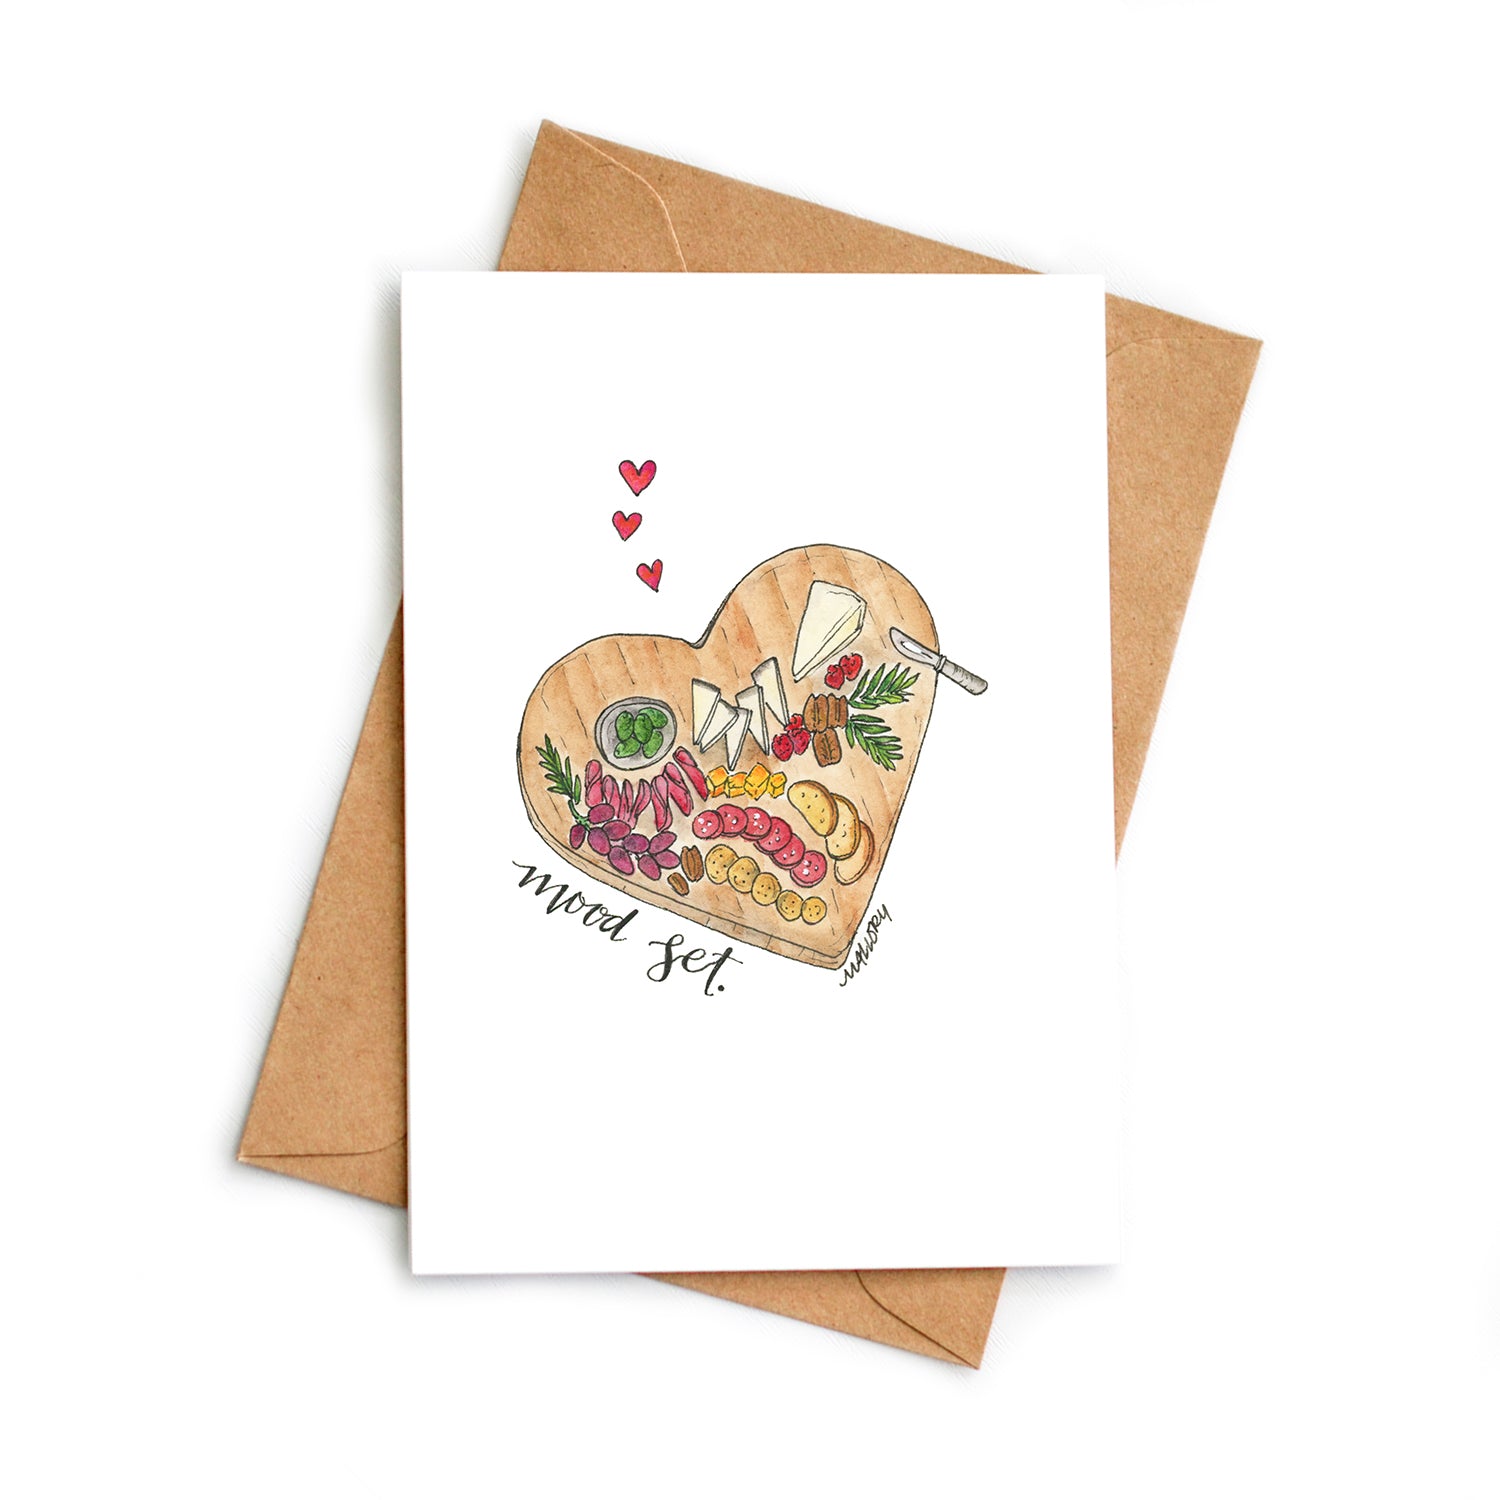 Image depicts a charcuterie board in the shape of a heart with fancy cheeses, cured meats, berries and herbs. Little red hearts are above the charcuterie board. "Mood set" is hand-lettered on the card to signify "setting the mood" for Valentine's Day.